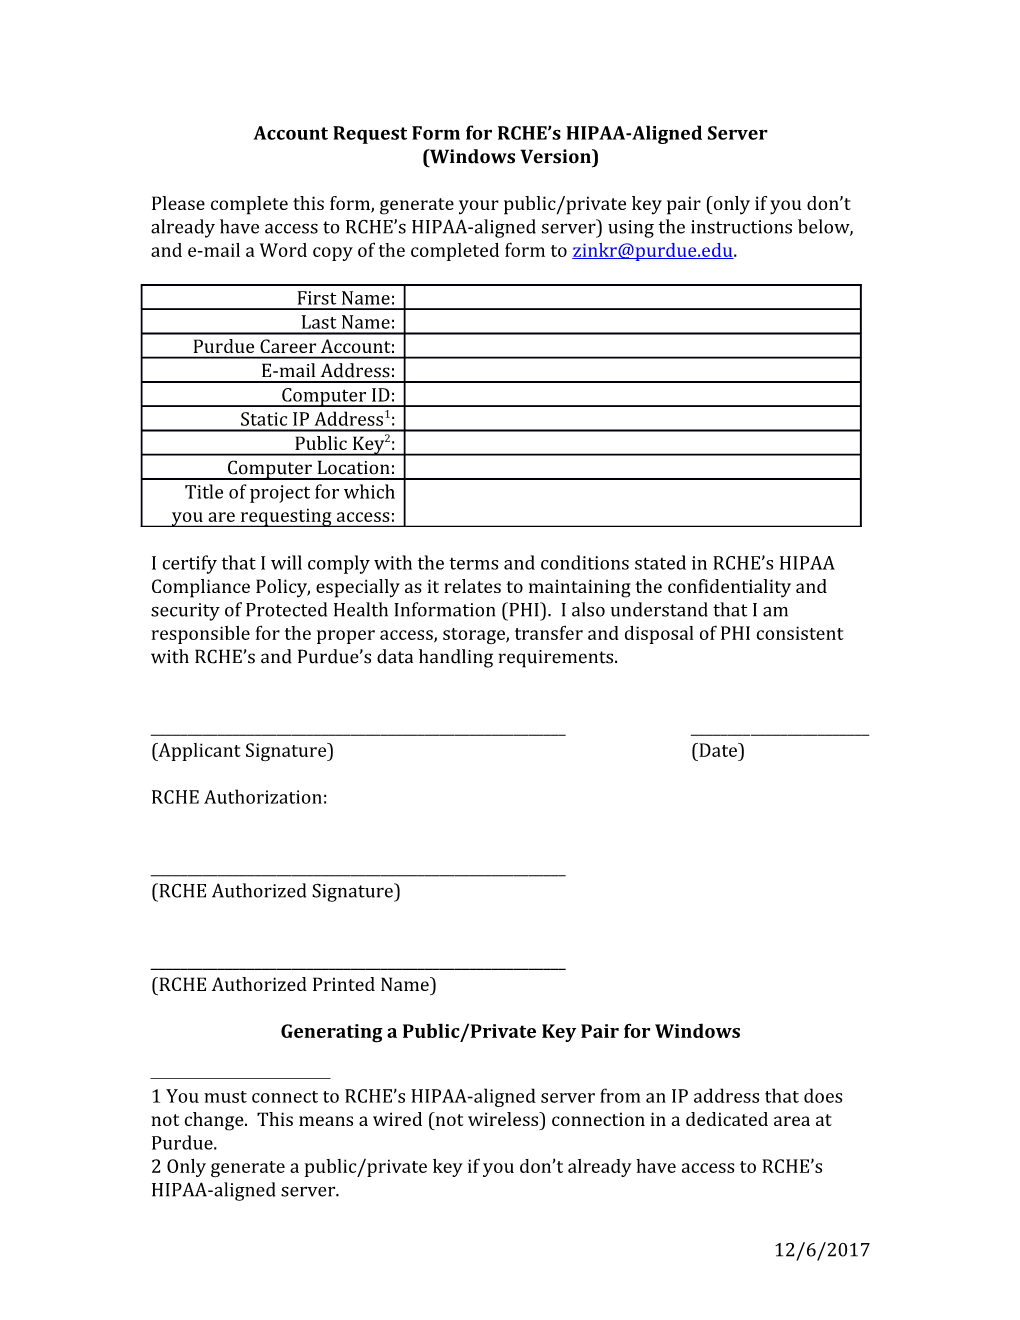 Account Request Form for RCHE S HIPAA-Aligned Server